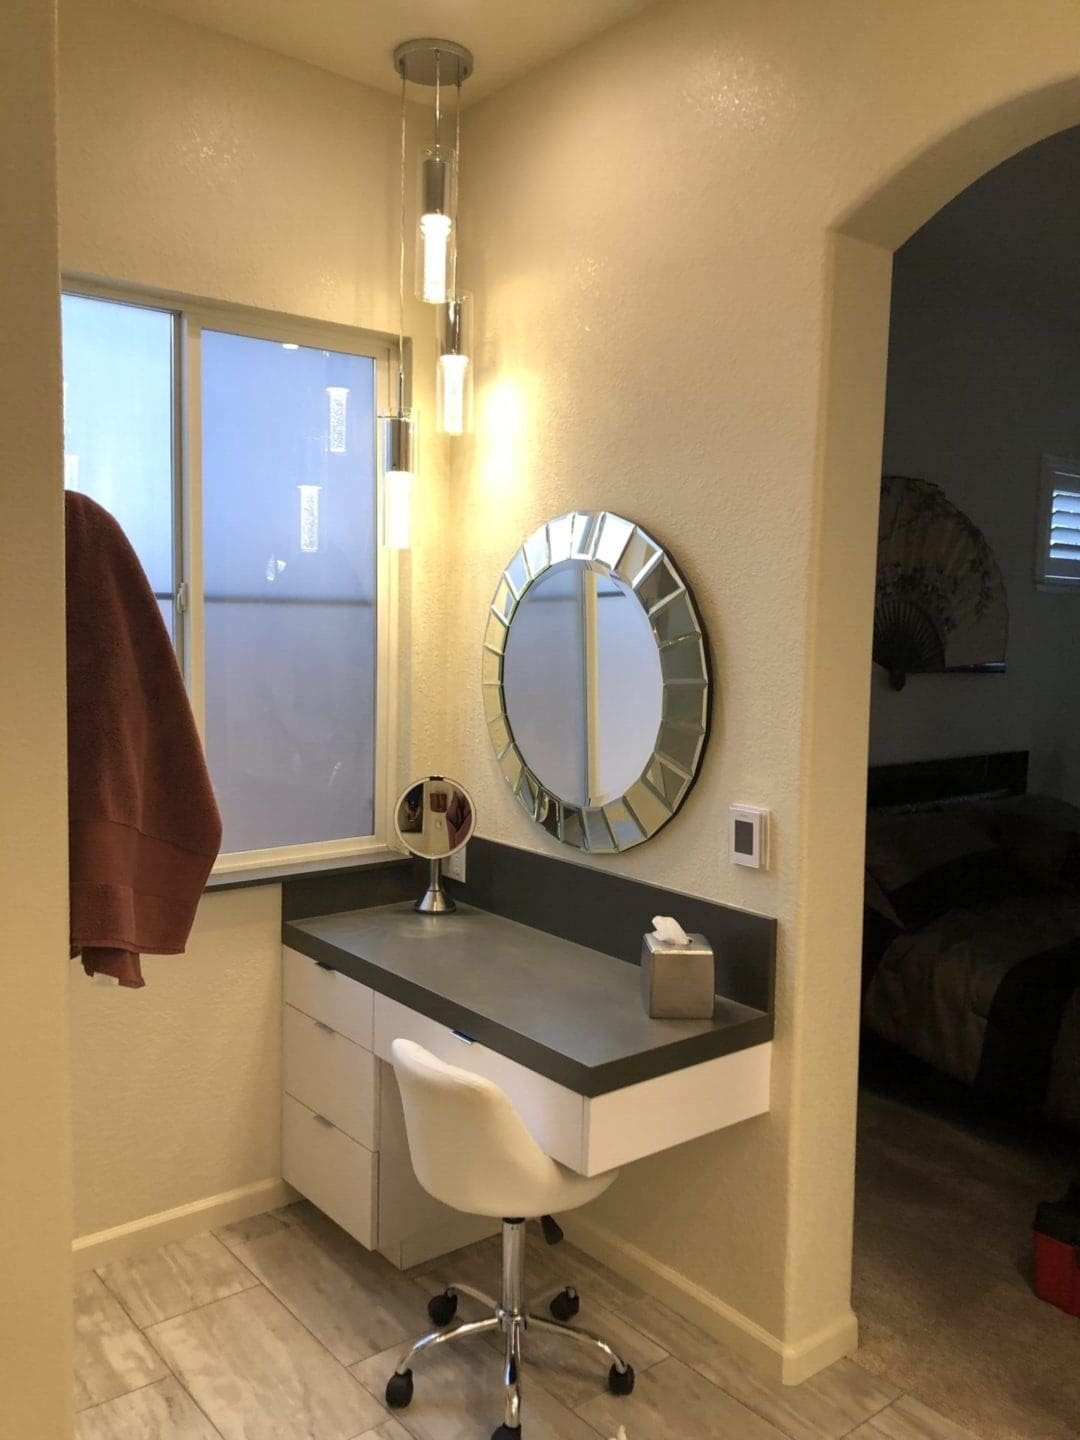 A bathroom with a sink and mirror in it